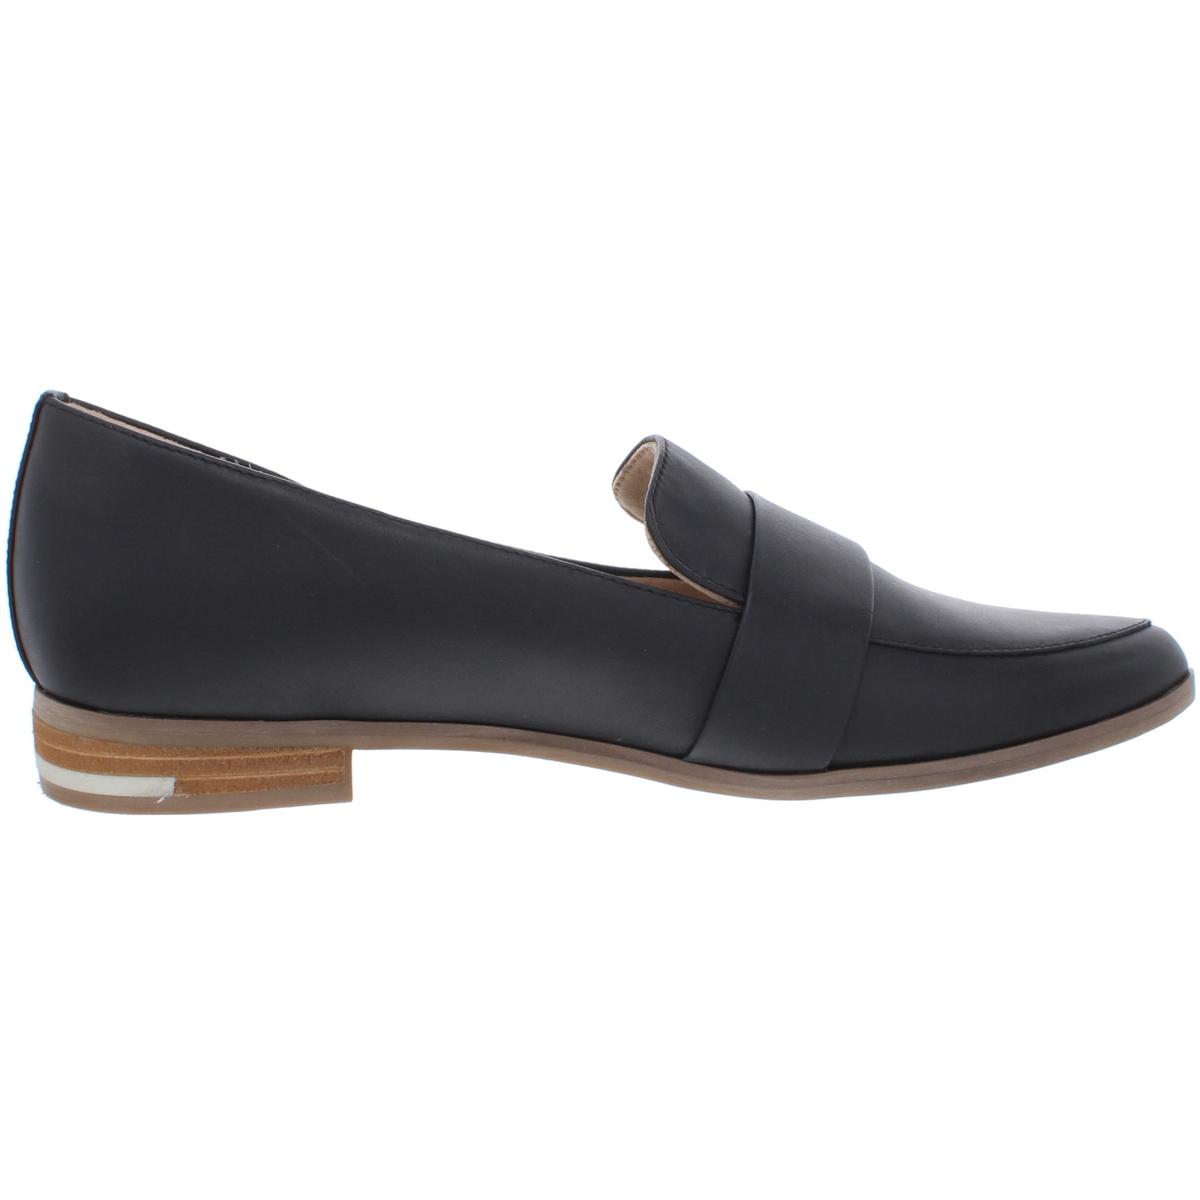 Dr. Scholl's Womens Faxon Leather Slip On Heeled Loafers Shoes BHFO ...